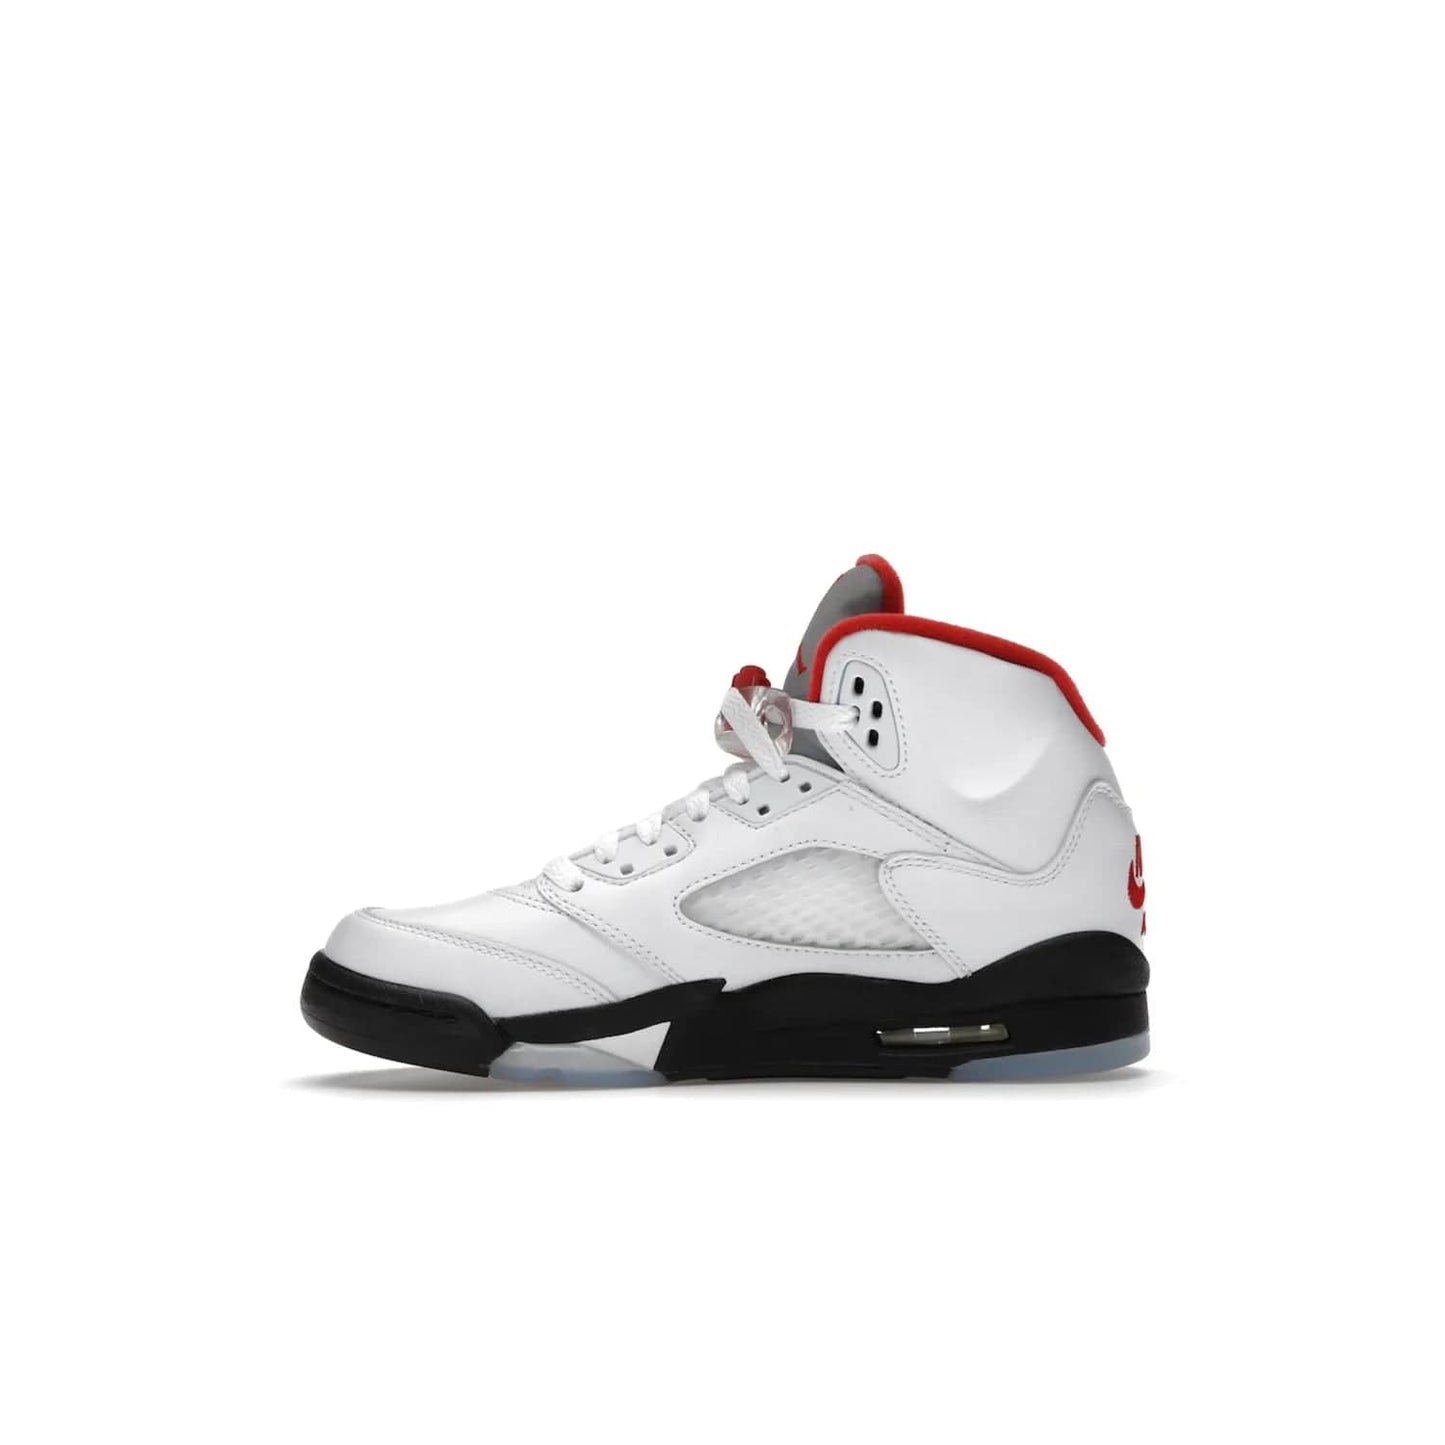 Jordan 5 Retro Fire Red Silver Tongue (2020) (GS) - Image 19 - Only at www.BallersClubKickz.com - A stylish option for any grade schooler. The Air Jordan 5 Retro Fire Red Silver Tongue 2020 GS features a combination of four hues, premium white leather, a clear mesh mid-upper and a reflective silver tongue. An icy translucent blue outsole completes the look. Available on May 2, $150.